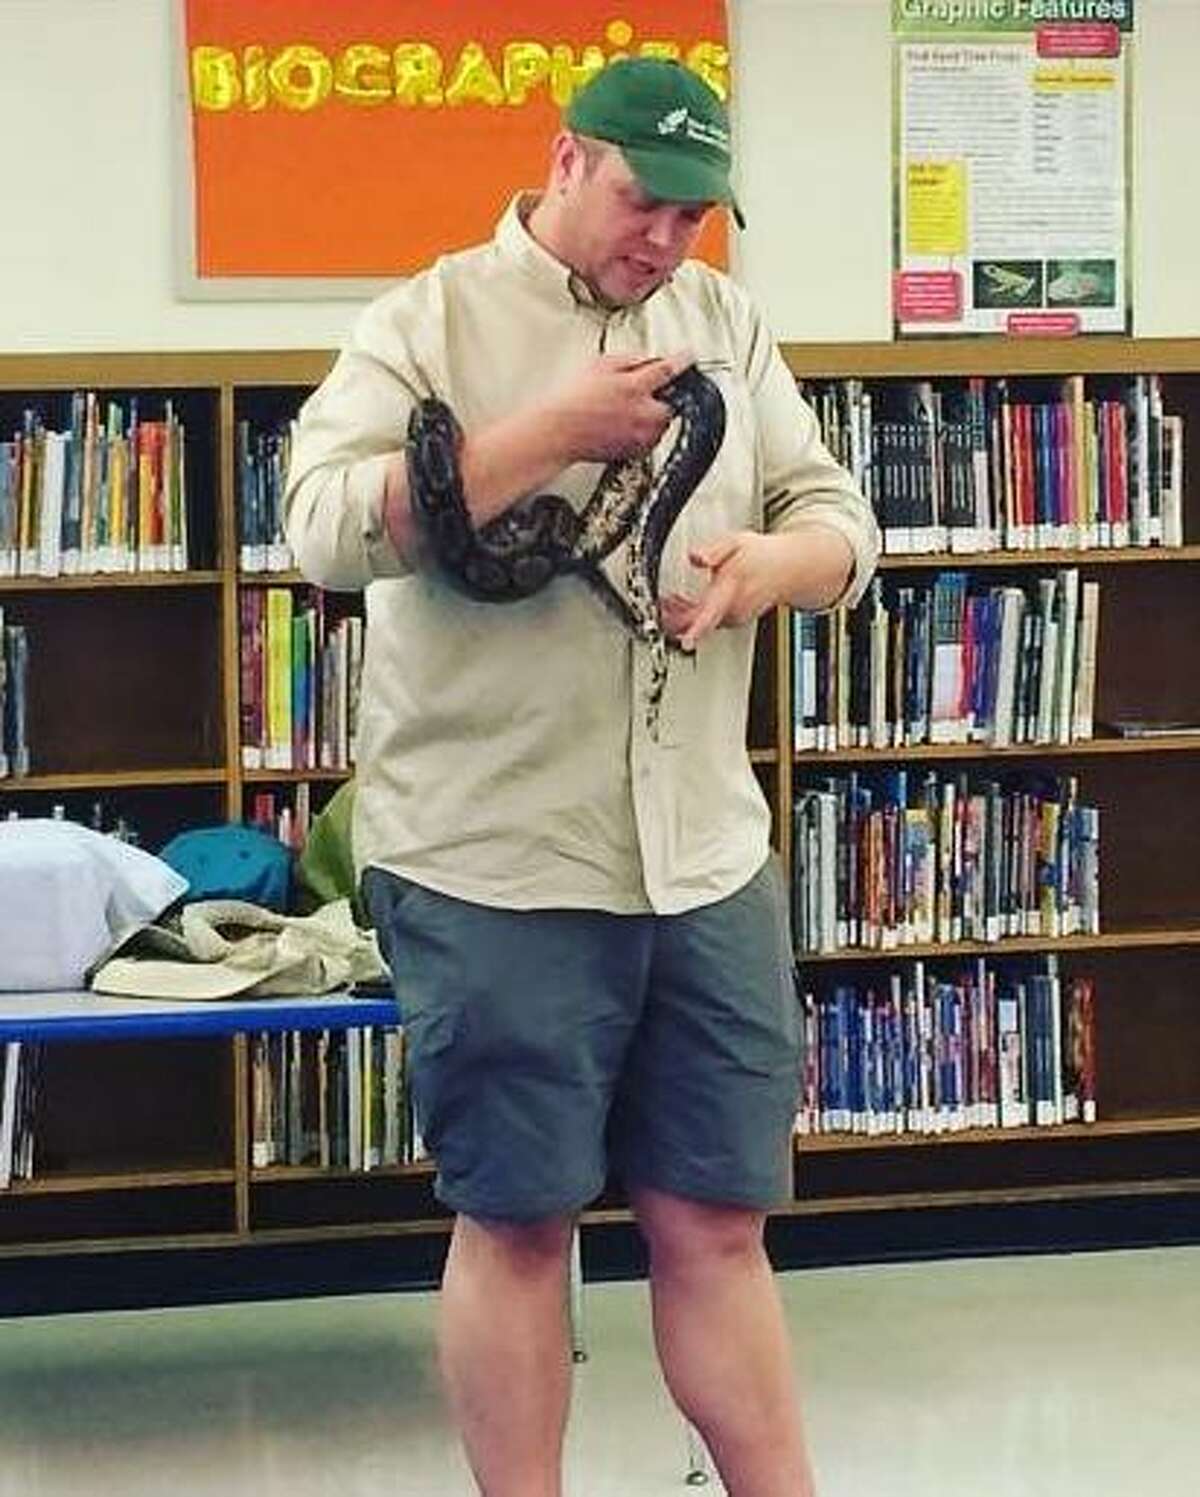 Bill Flynn, director of animal care at the New Canaan Nature Center, shows his slippery, wriggly friend to New York City children as part of the nature centers program that brings environmental education to thousands of city kids each year.